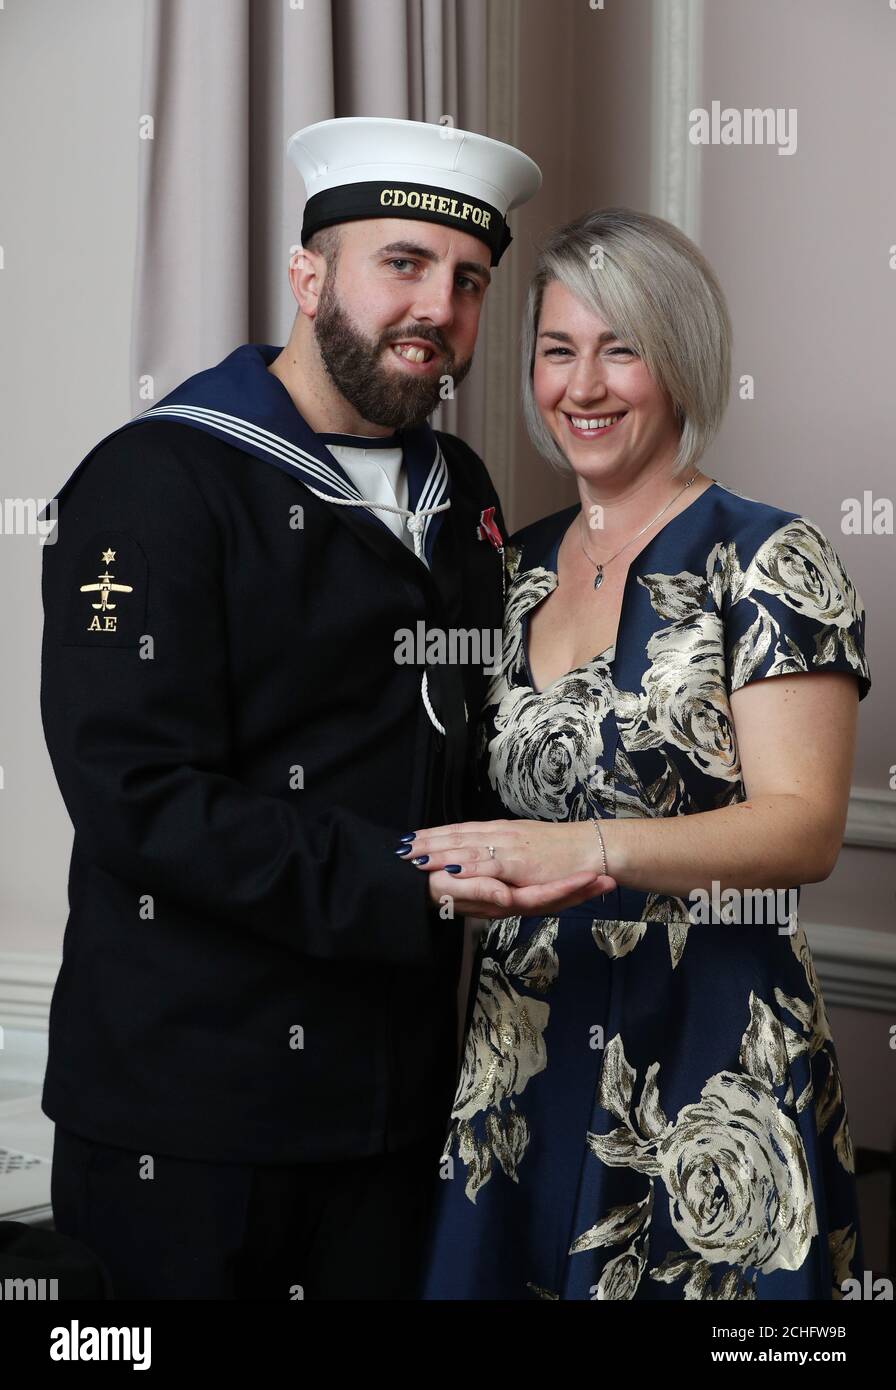 Mbe and his fiancze adele thomasson at the stafford hotel hi-res stock ...